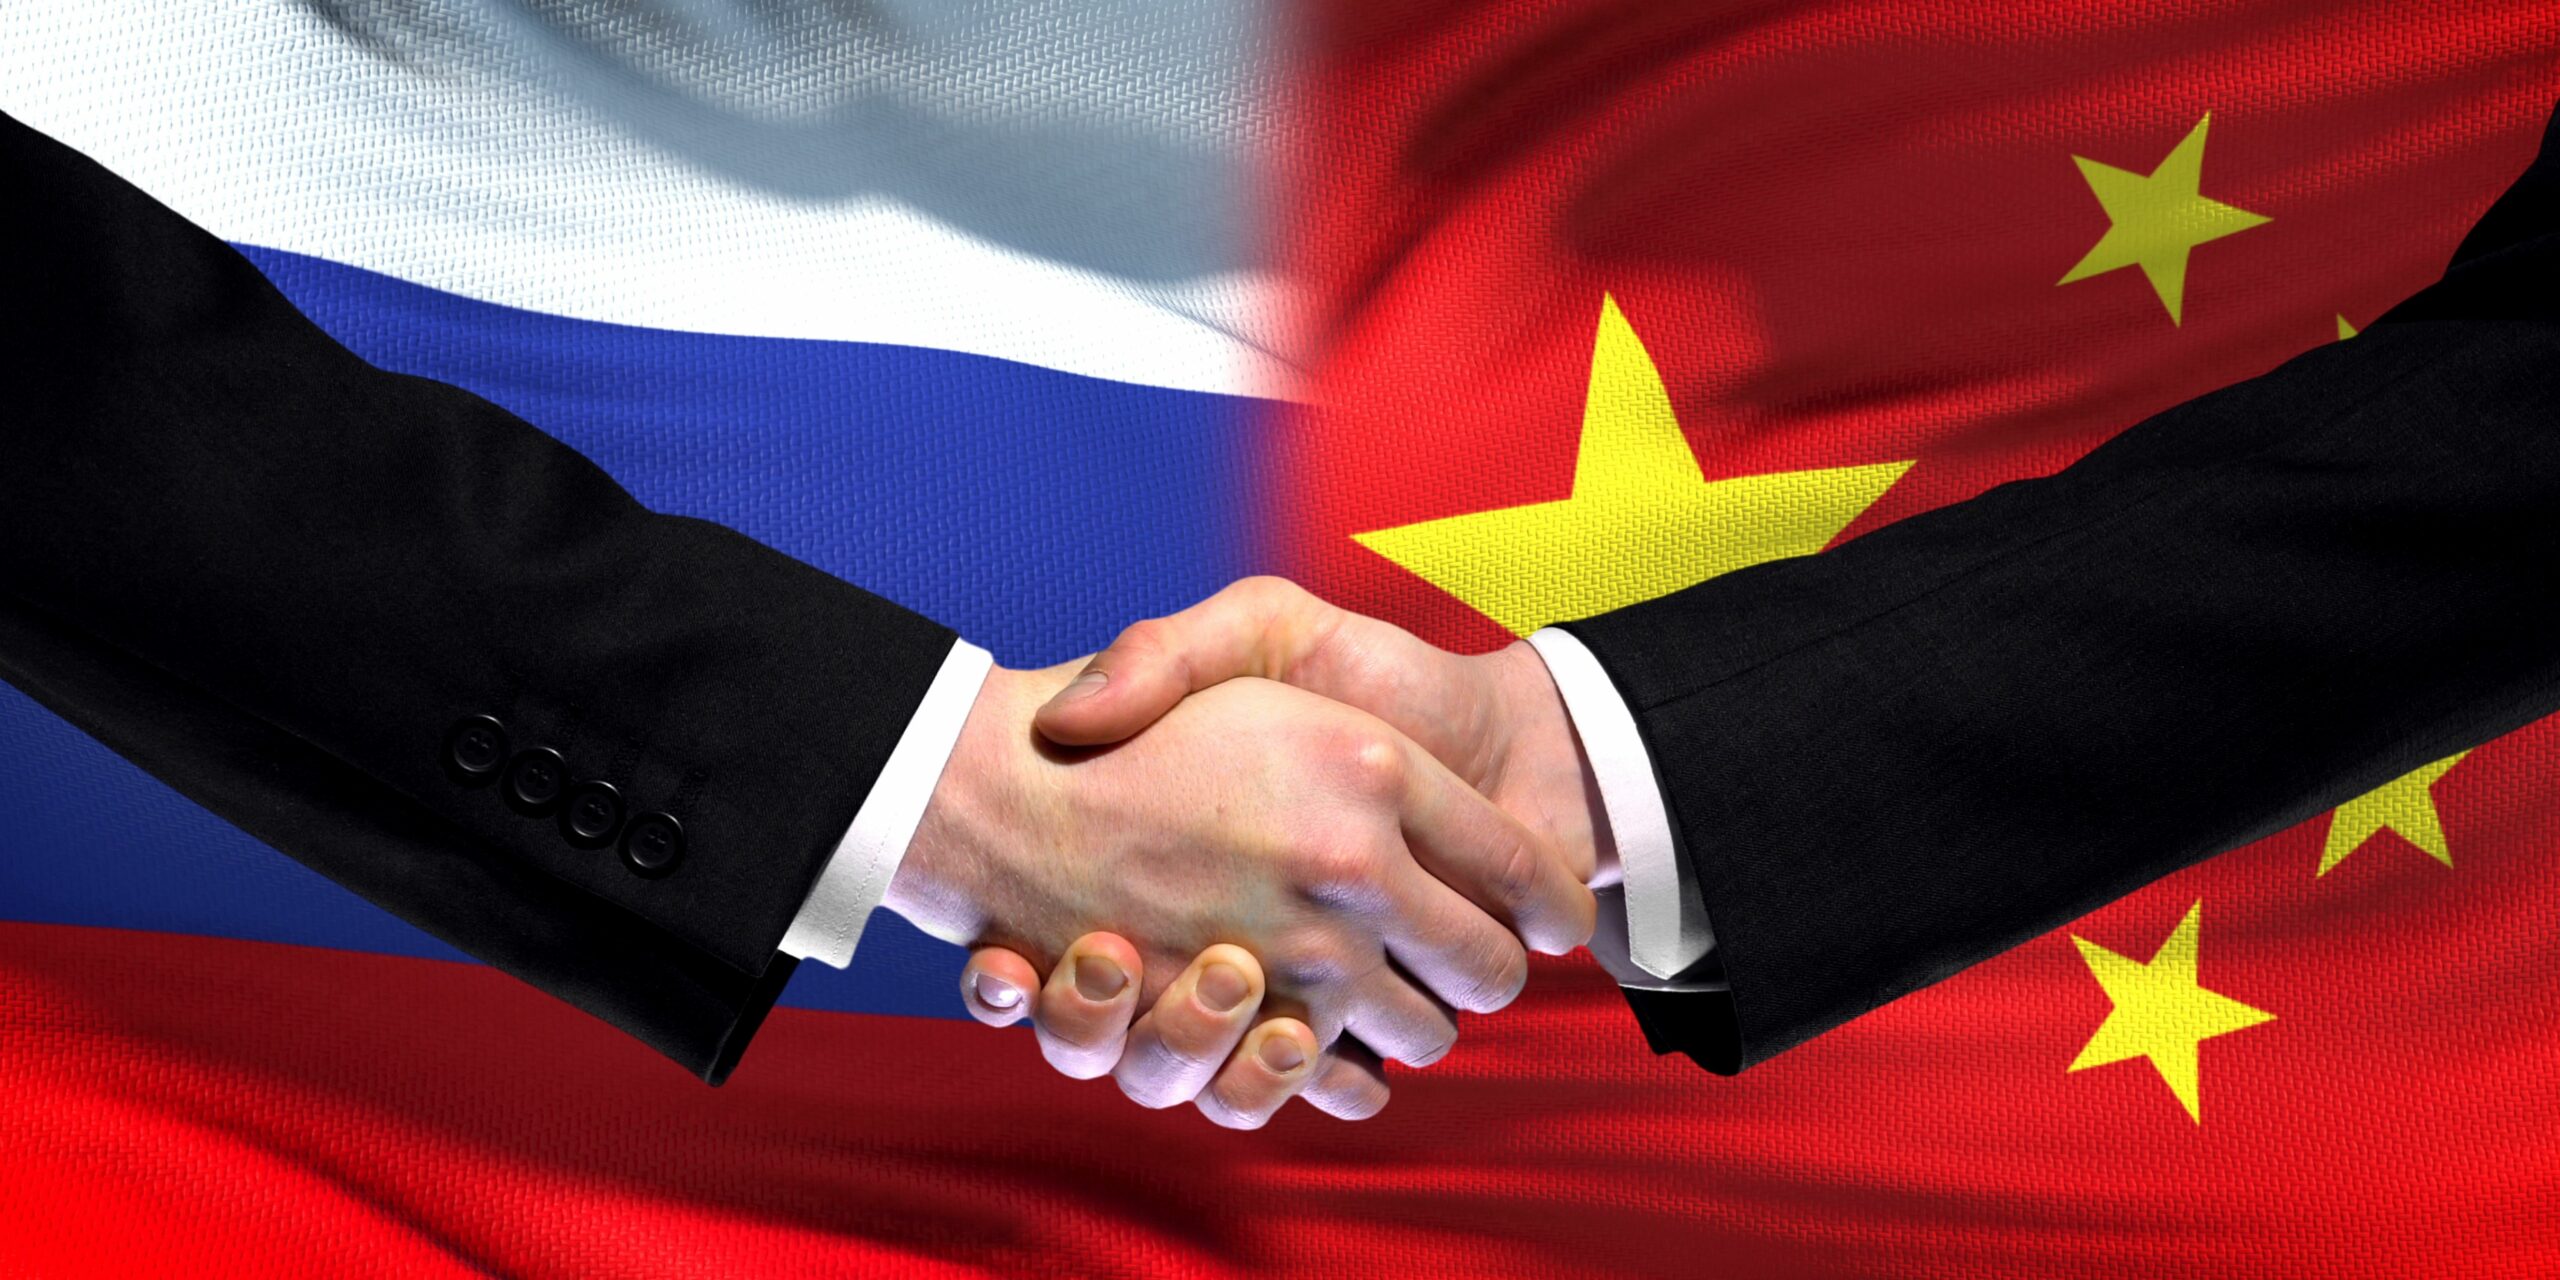 China and russia